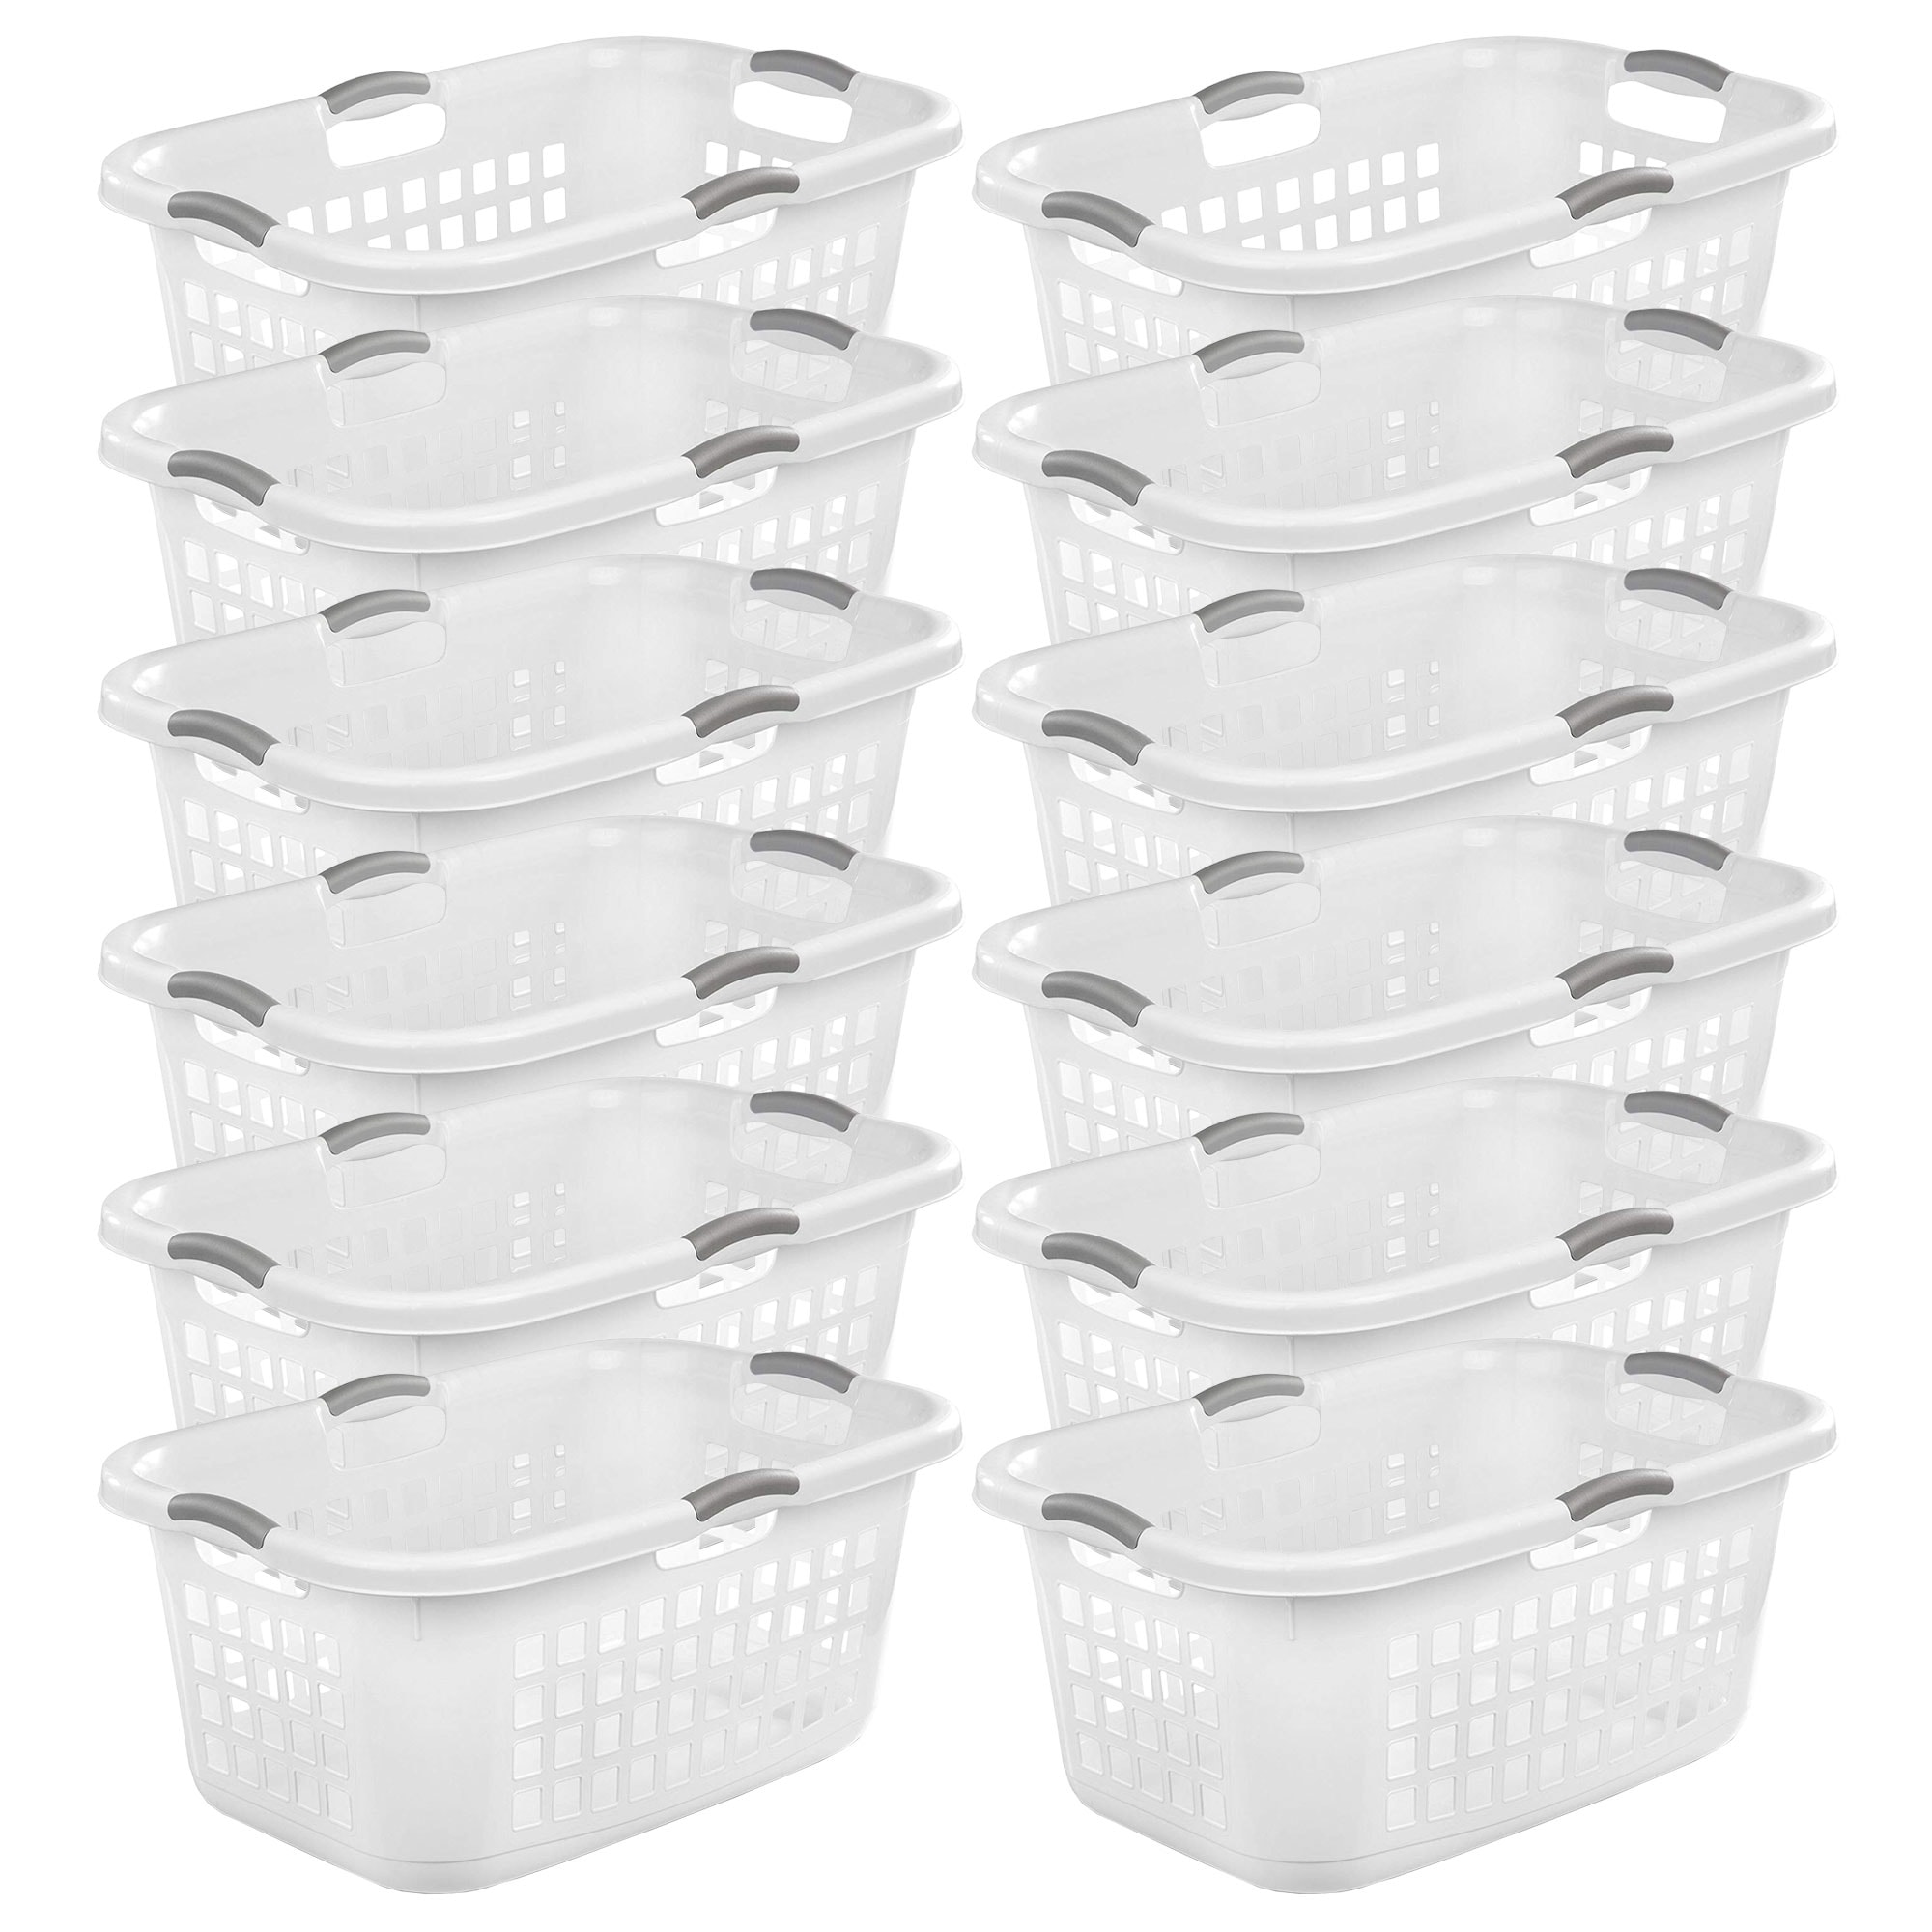 https://ak1.ostkcdn.com/images/products/is/images/direct/a03ee615eae31f91c6b478a87feeb4ced4776f80/Sterilite-Ultra-2-Bushel-Plastic-Stackable-Laundry-Basket-Bin%2C-White-%2812-Pack%29.jpg